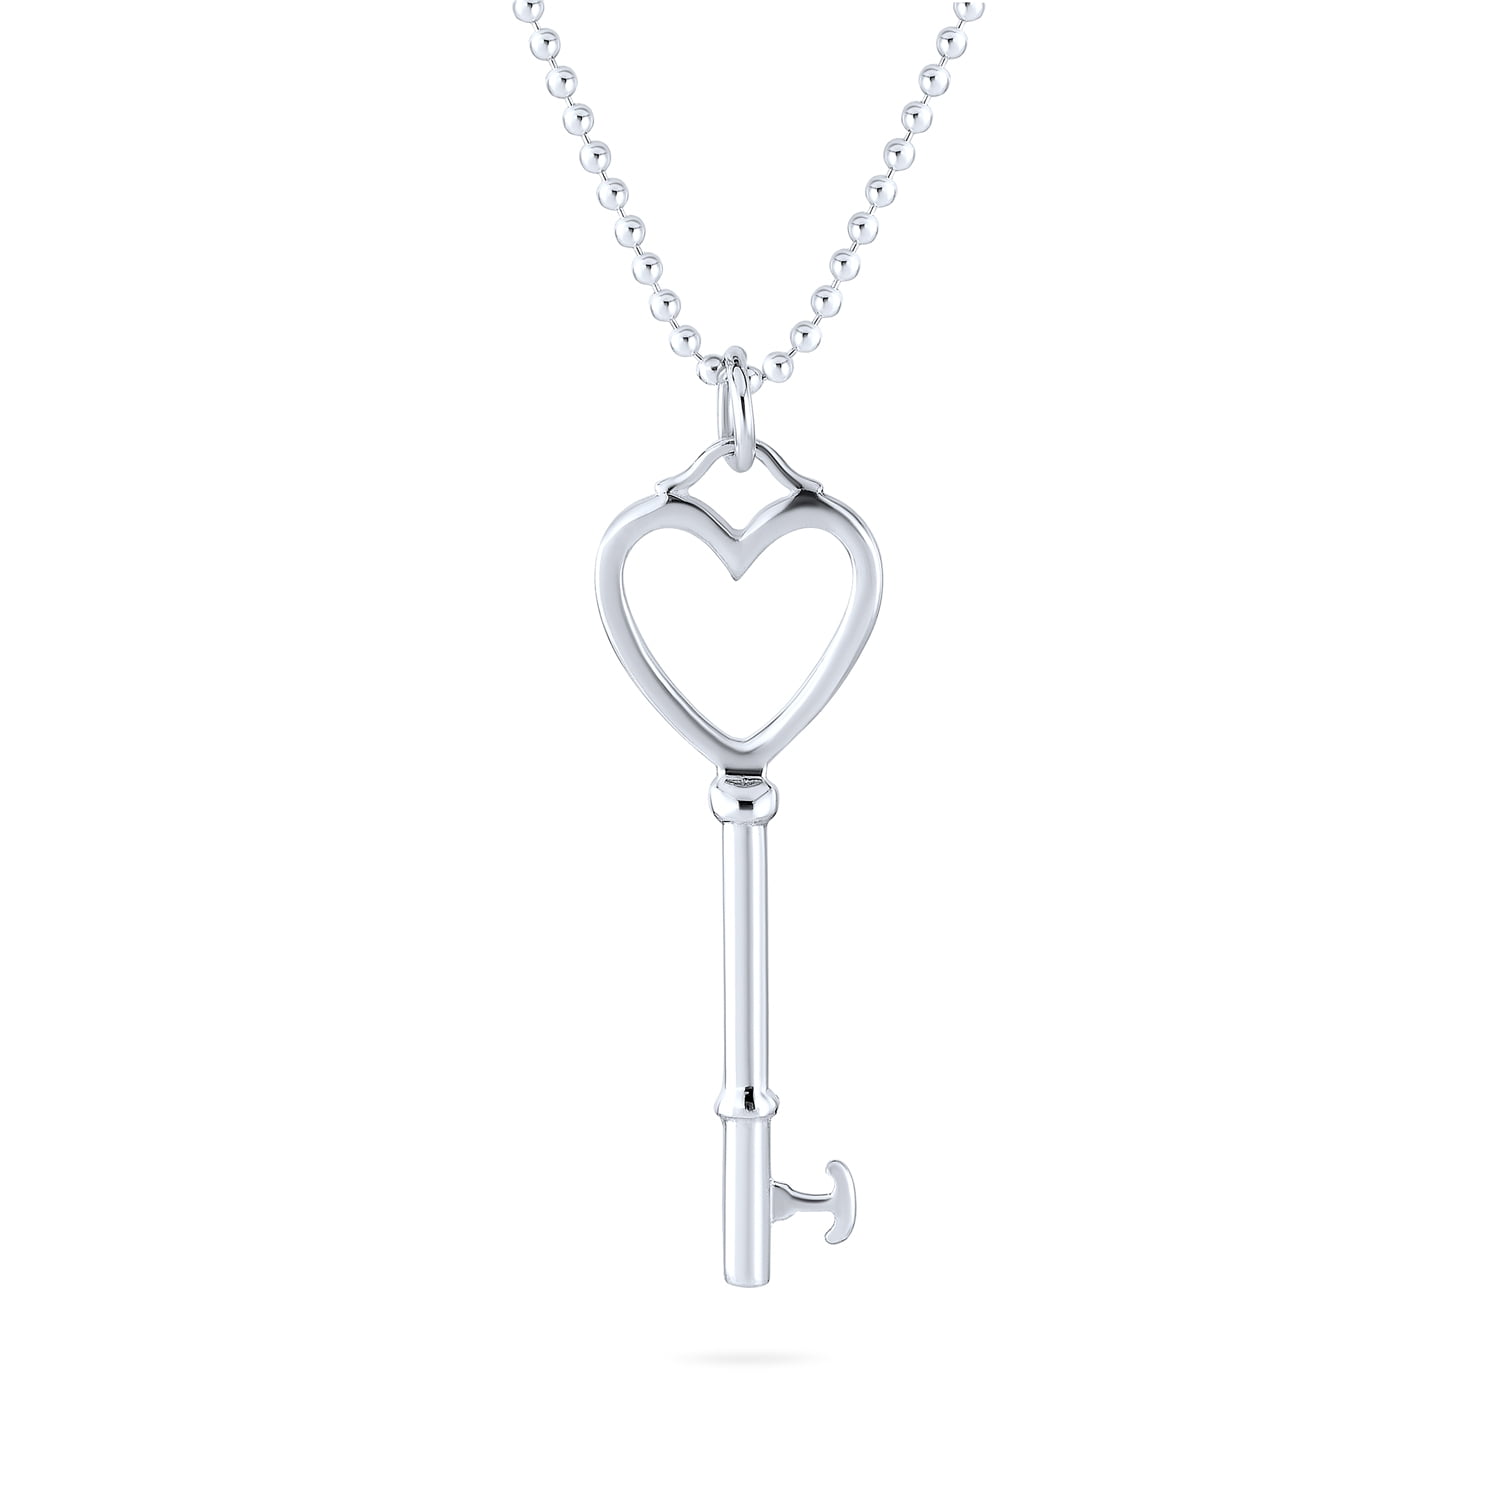 Skeleton Key-to-Heart Love Charm Pendant & Chain Necklace in 925 Sterling Silver 